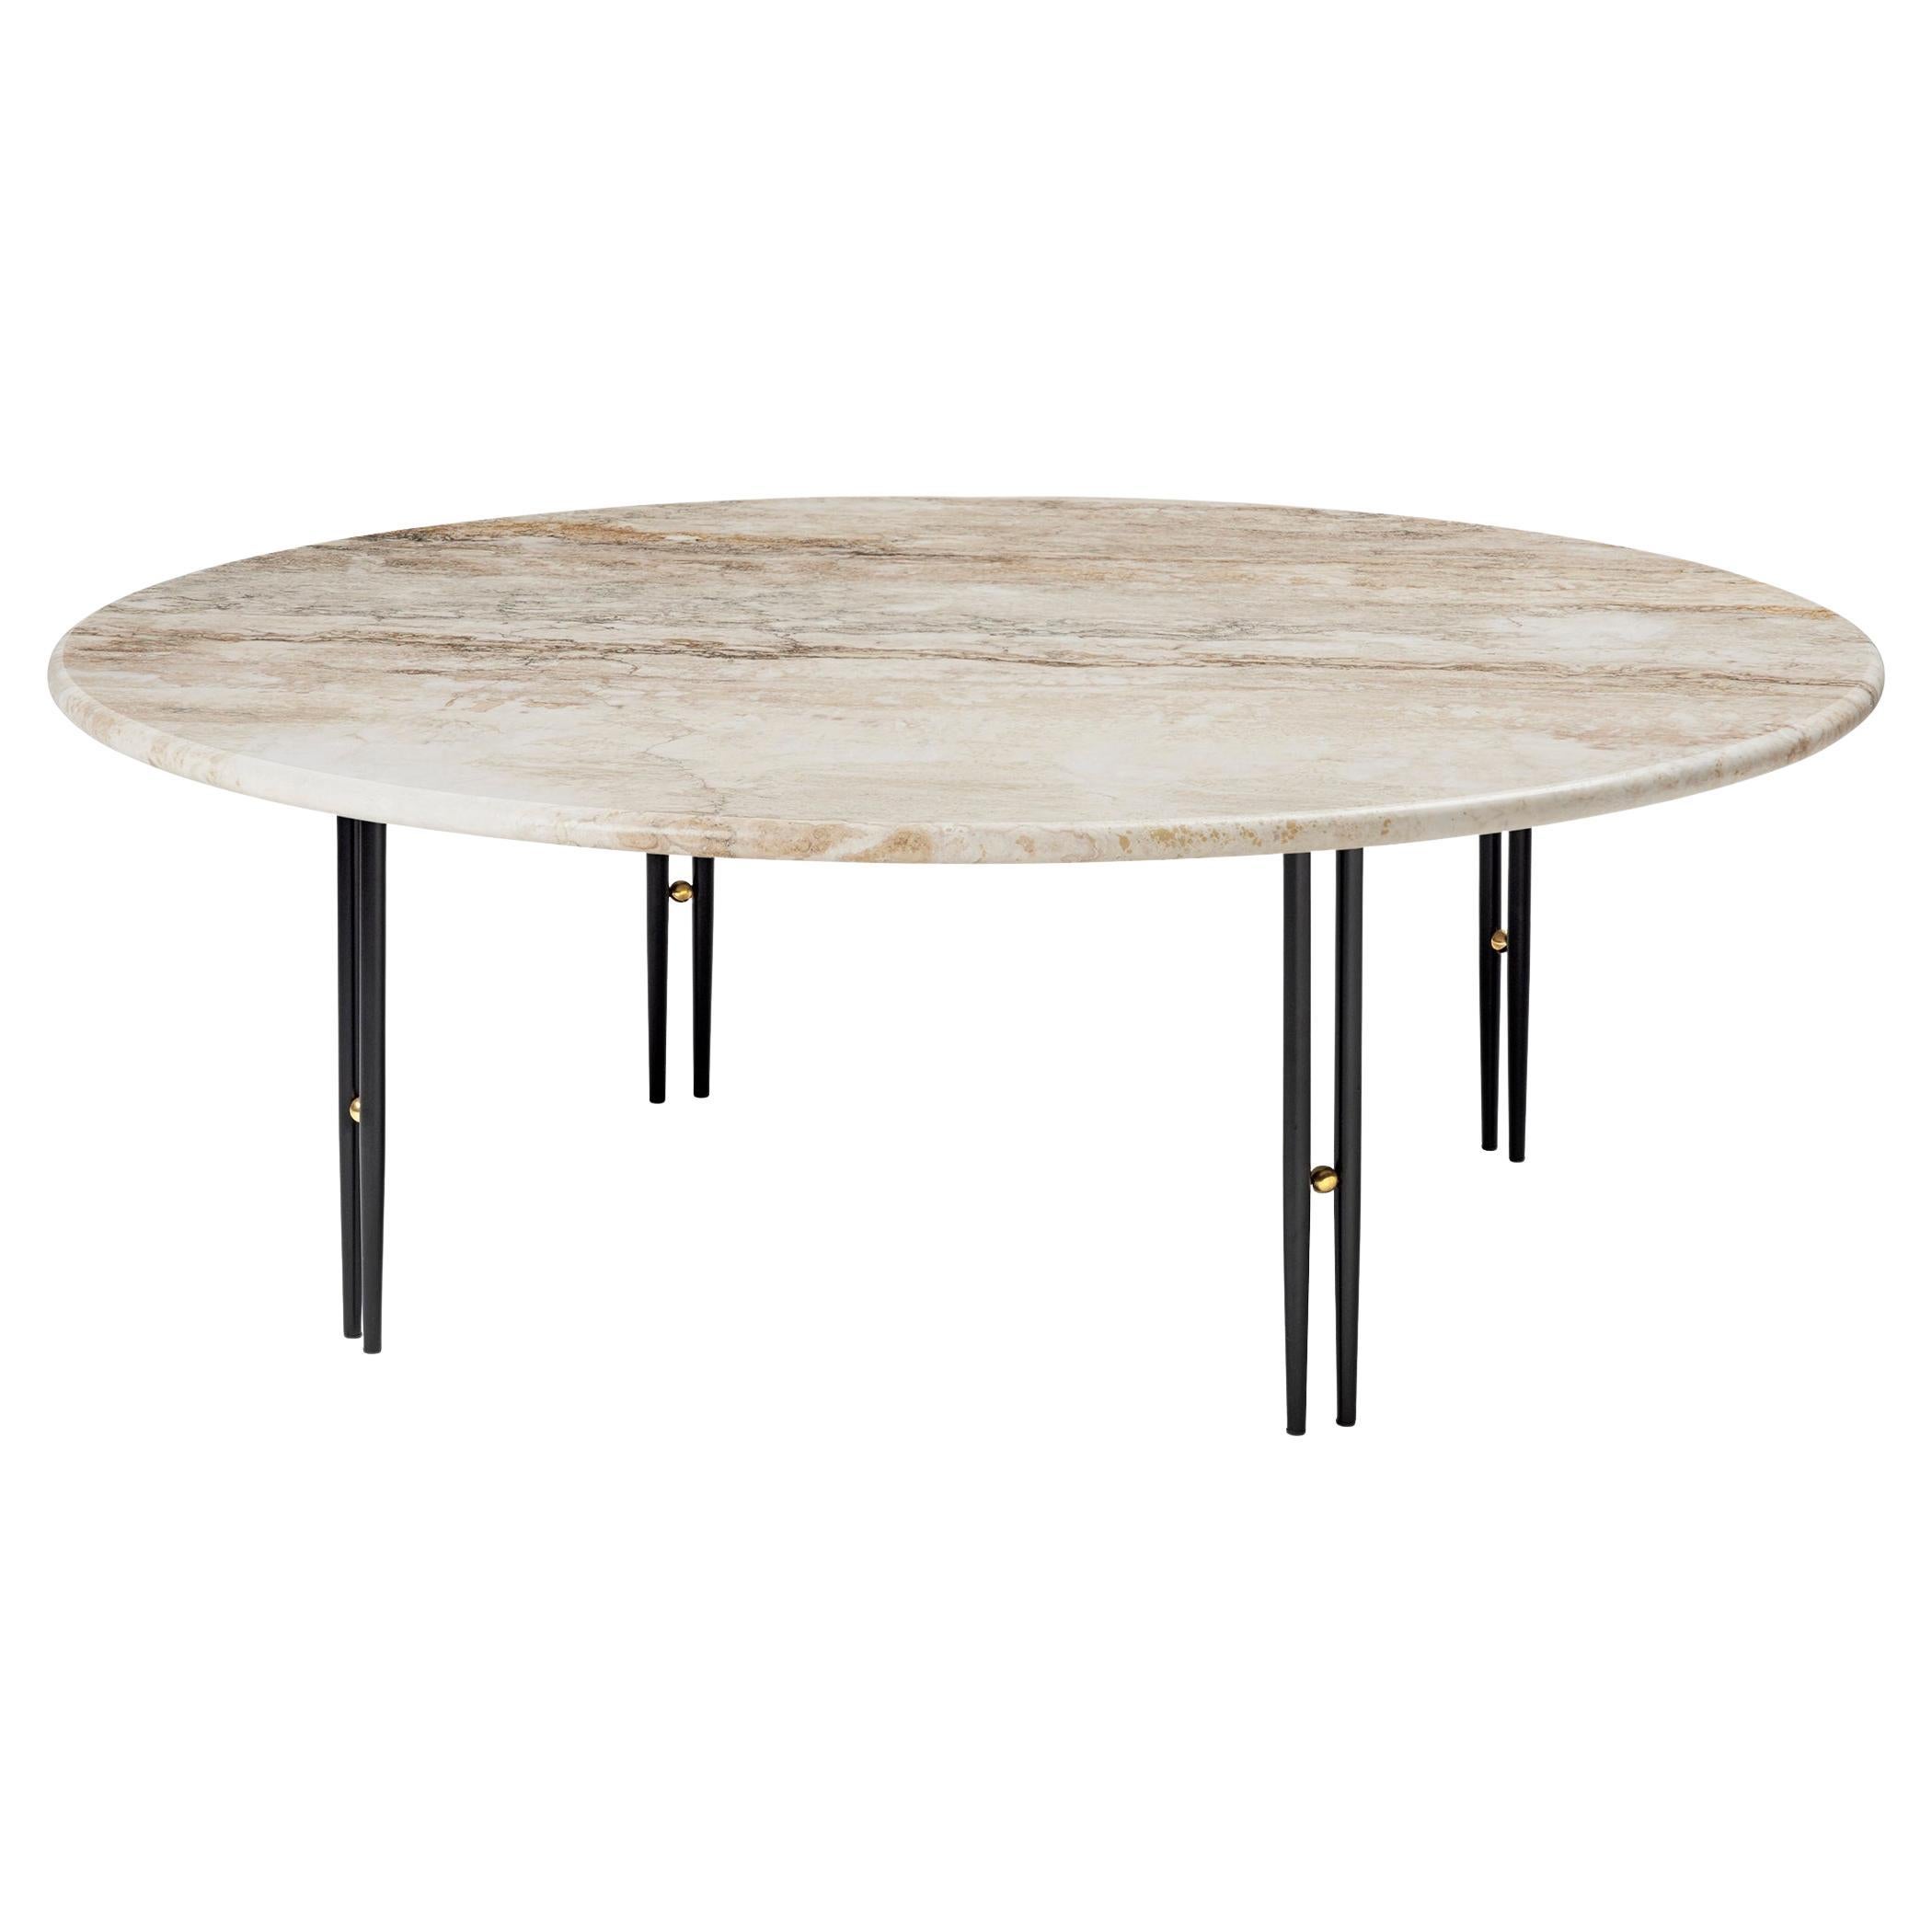 Large ‘IOI’ Travertine Coffee Table by GamFratesi for GUBI For Sale